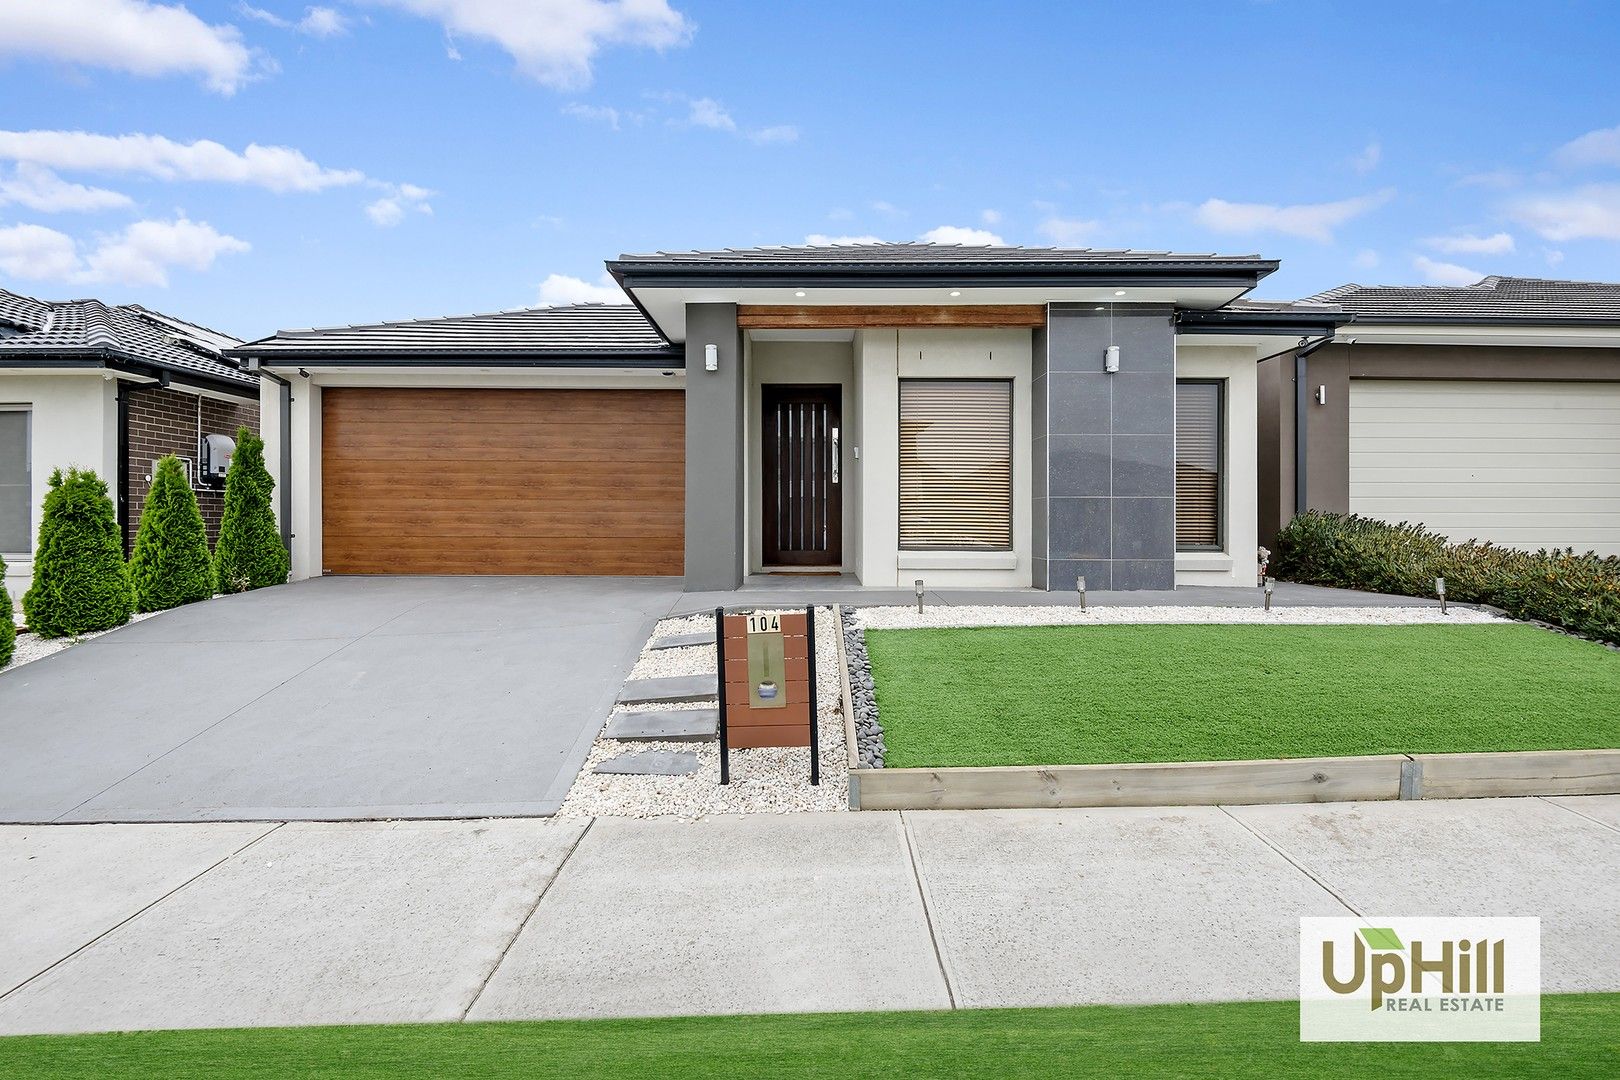 4 bedrooms House in 104 Moxham Drive CLYDE NORTH VIC, 3978